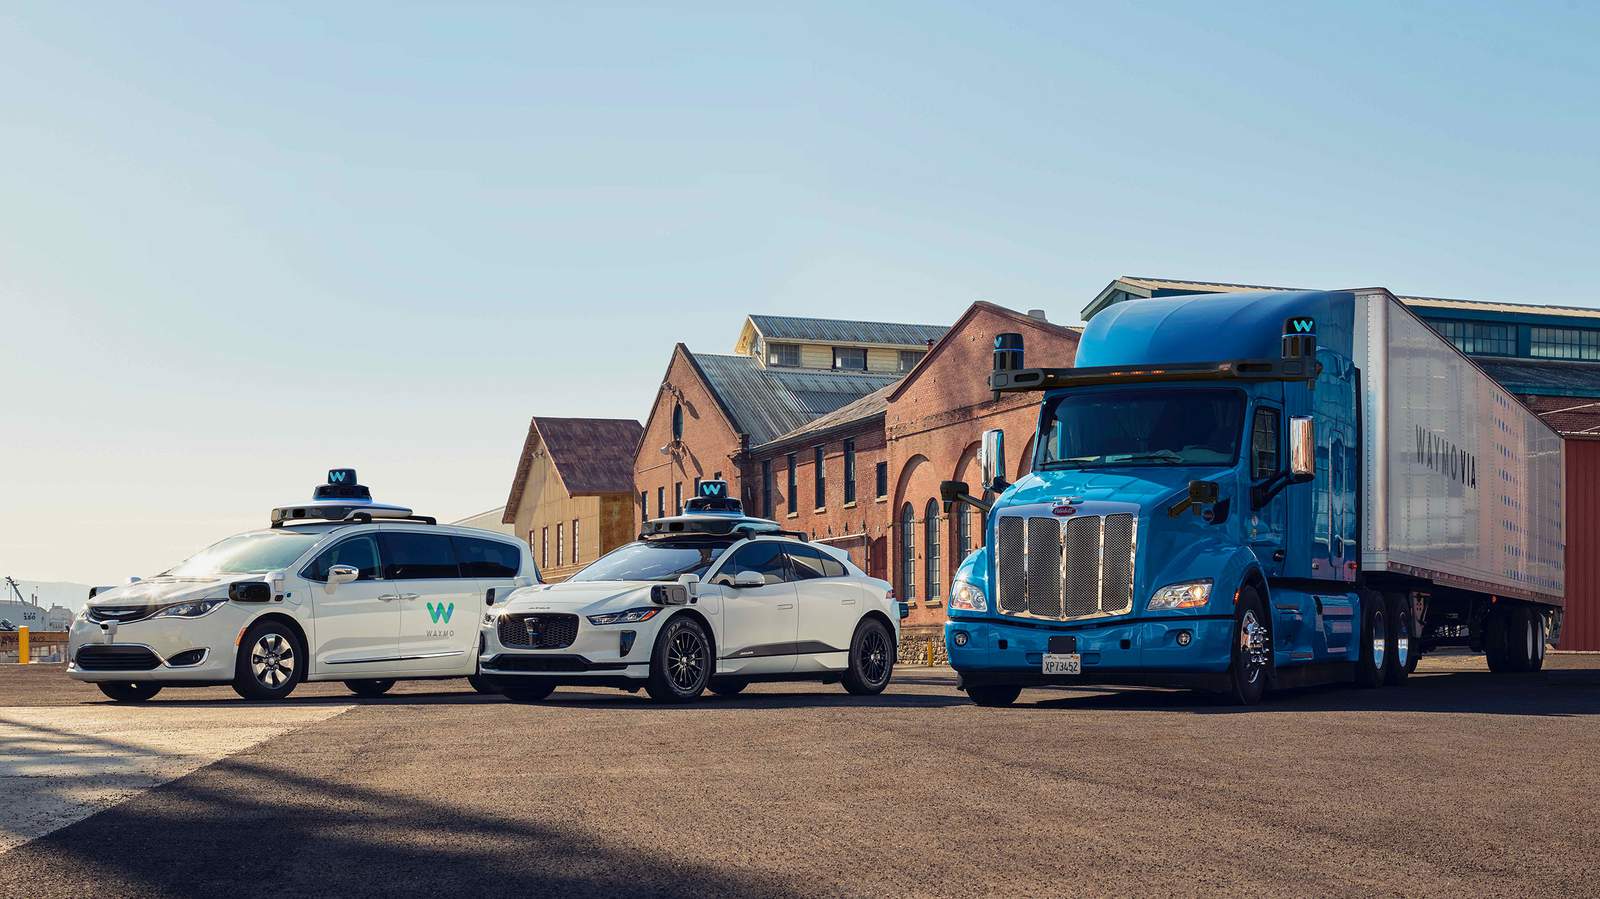 Self-driving car company Waymo raises $2.25 billion in first external round of funding